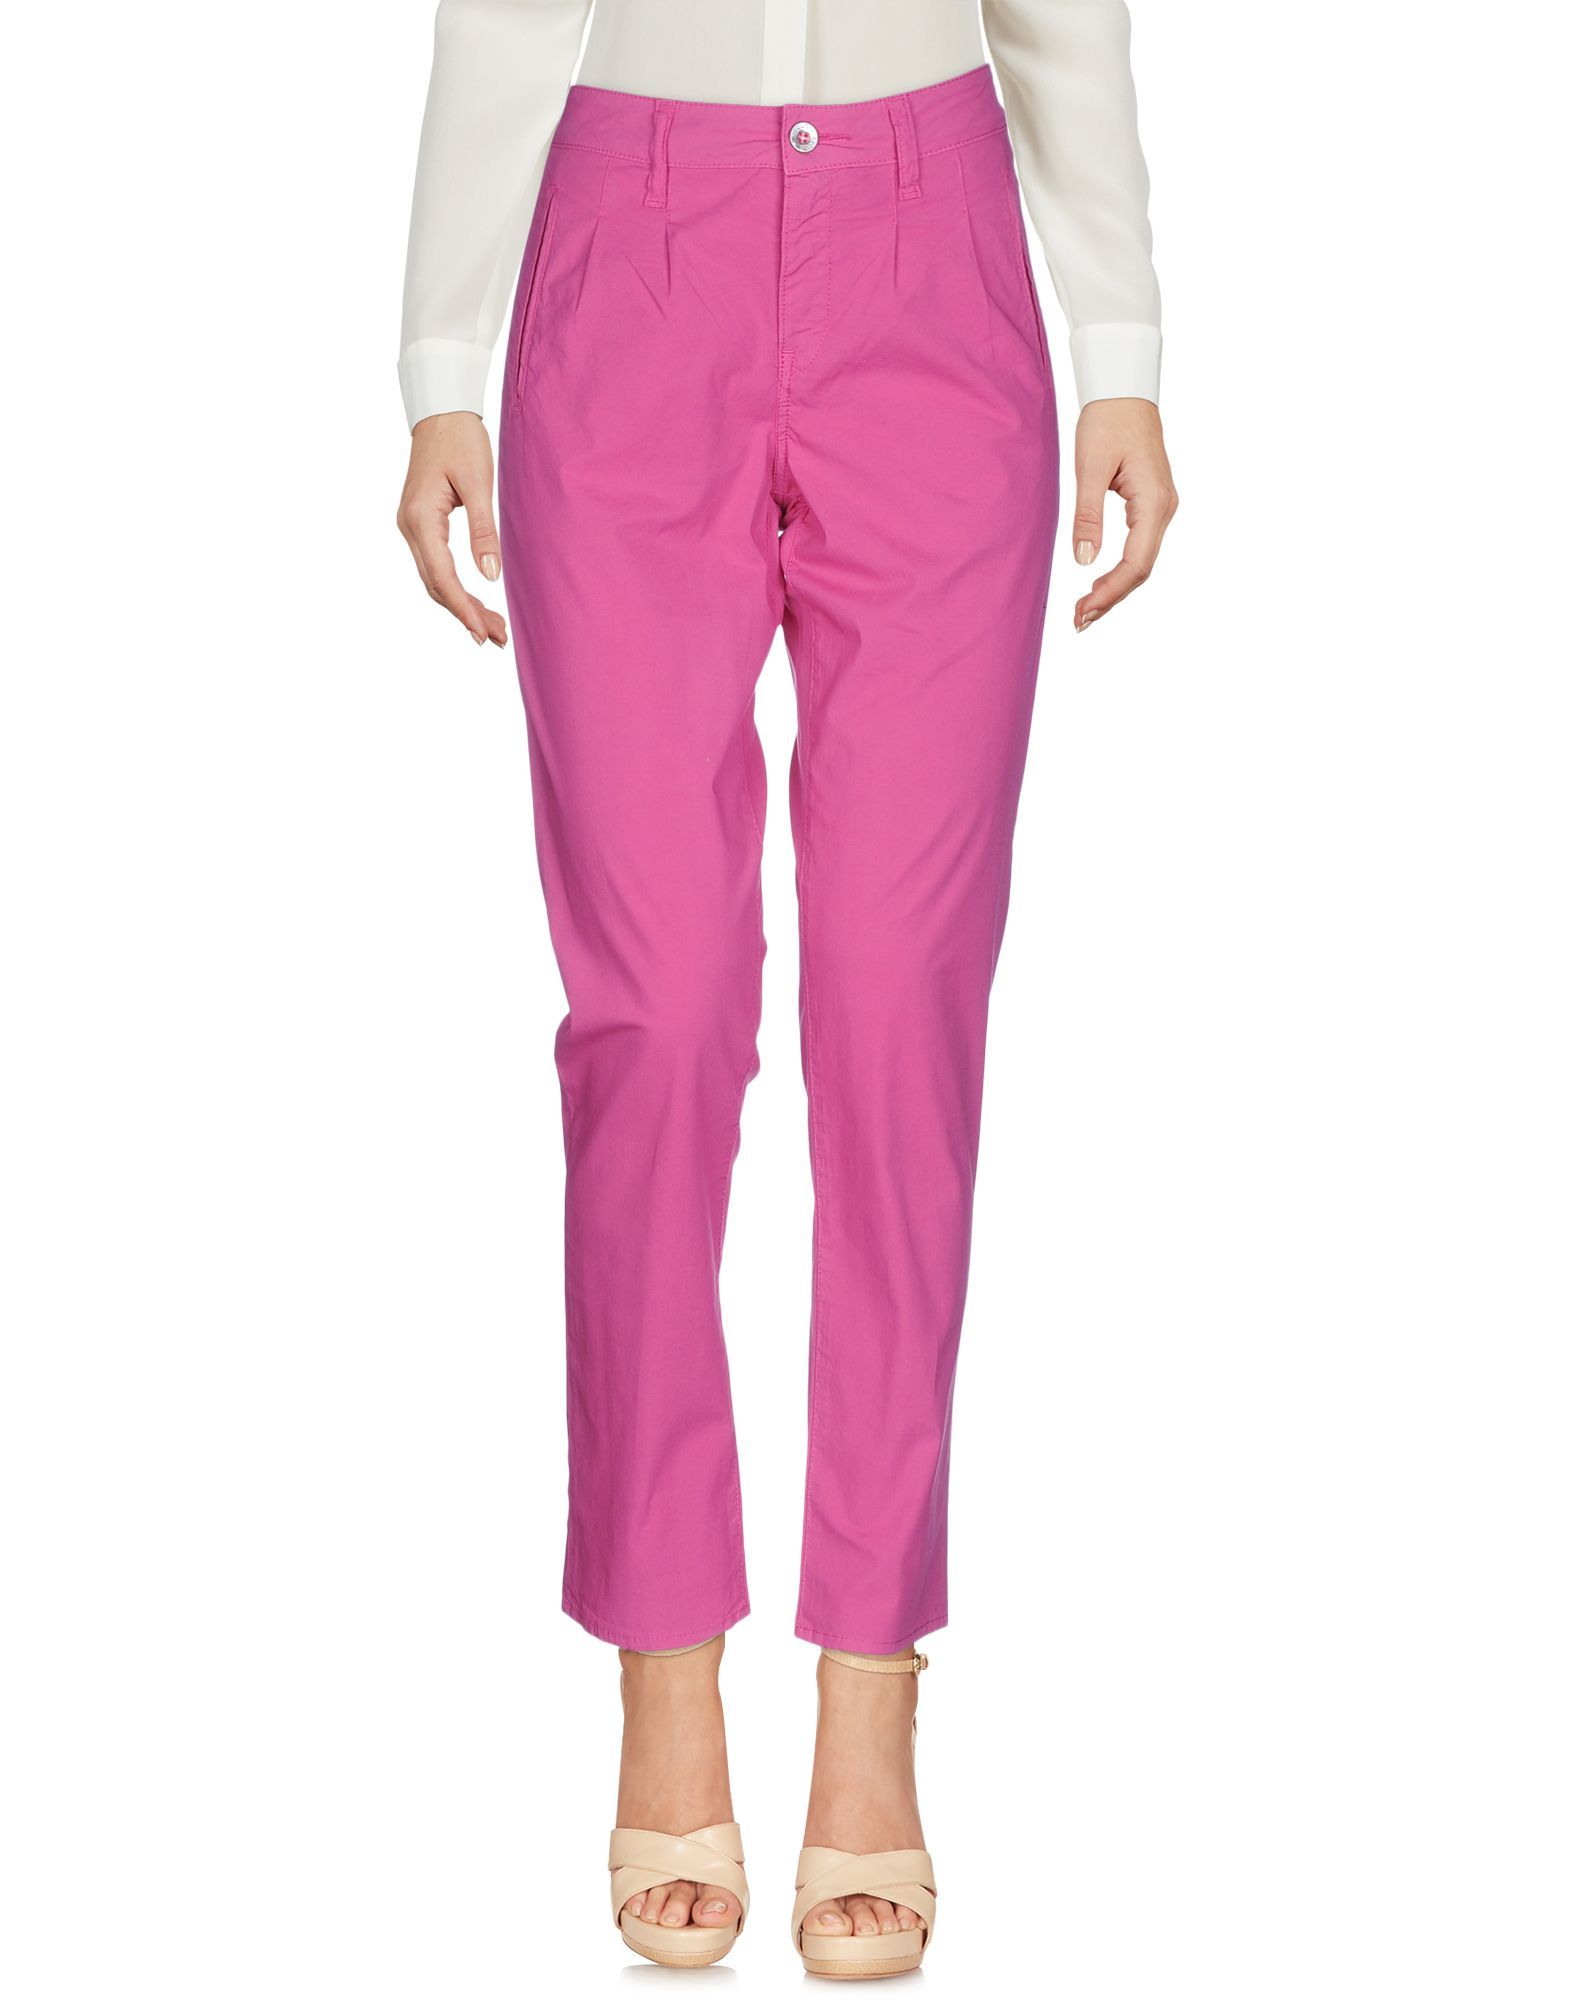 plain weave, studs, basic solid colour, mid rise, regular fit, tapered leg, button, zip, multipockets, stretch, pants